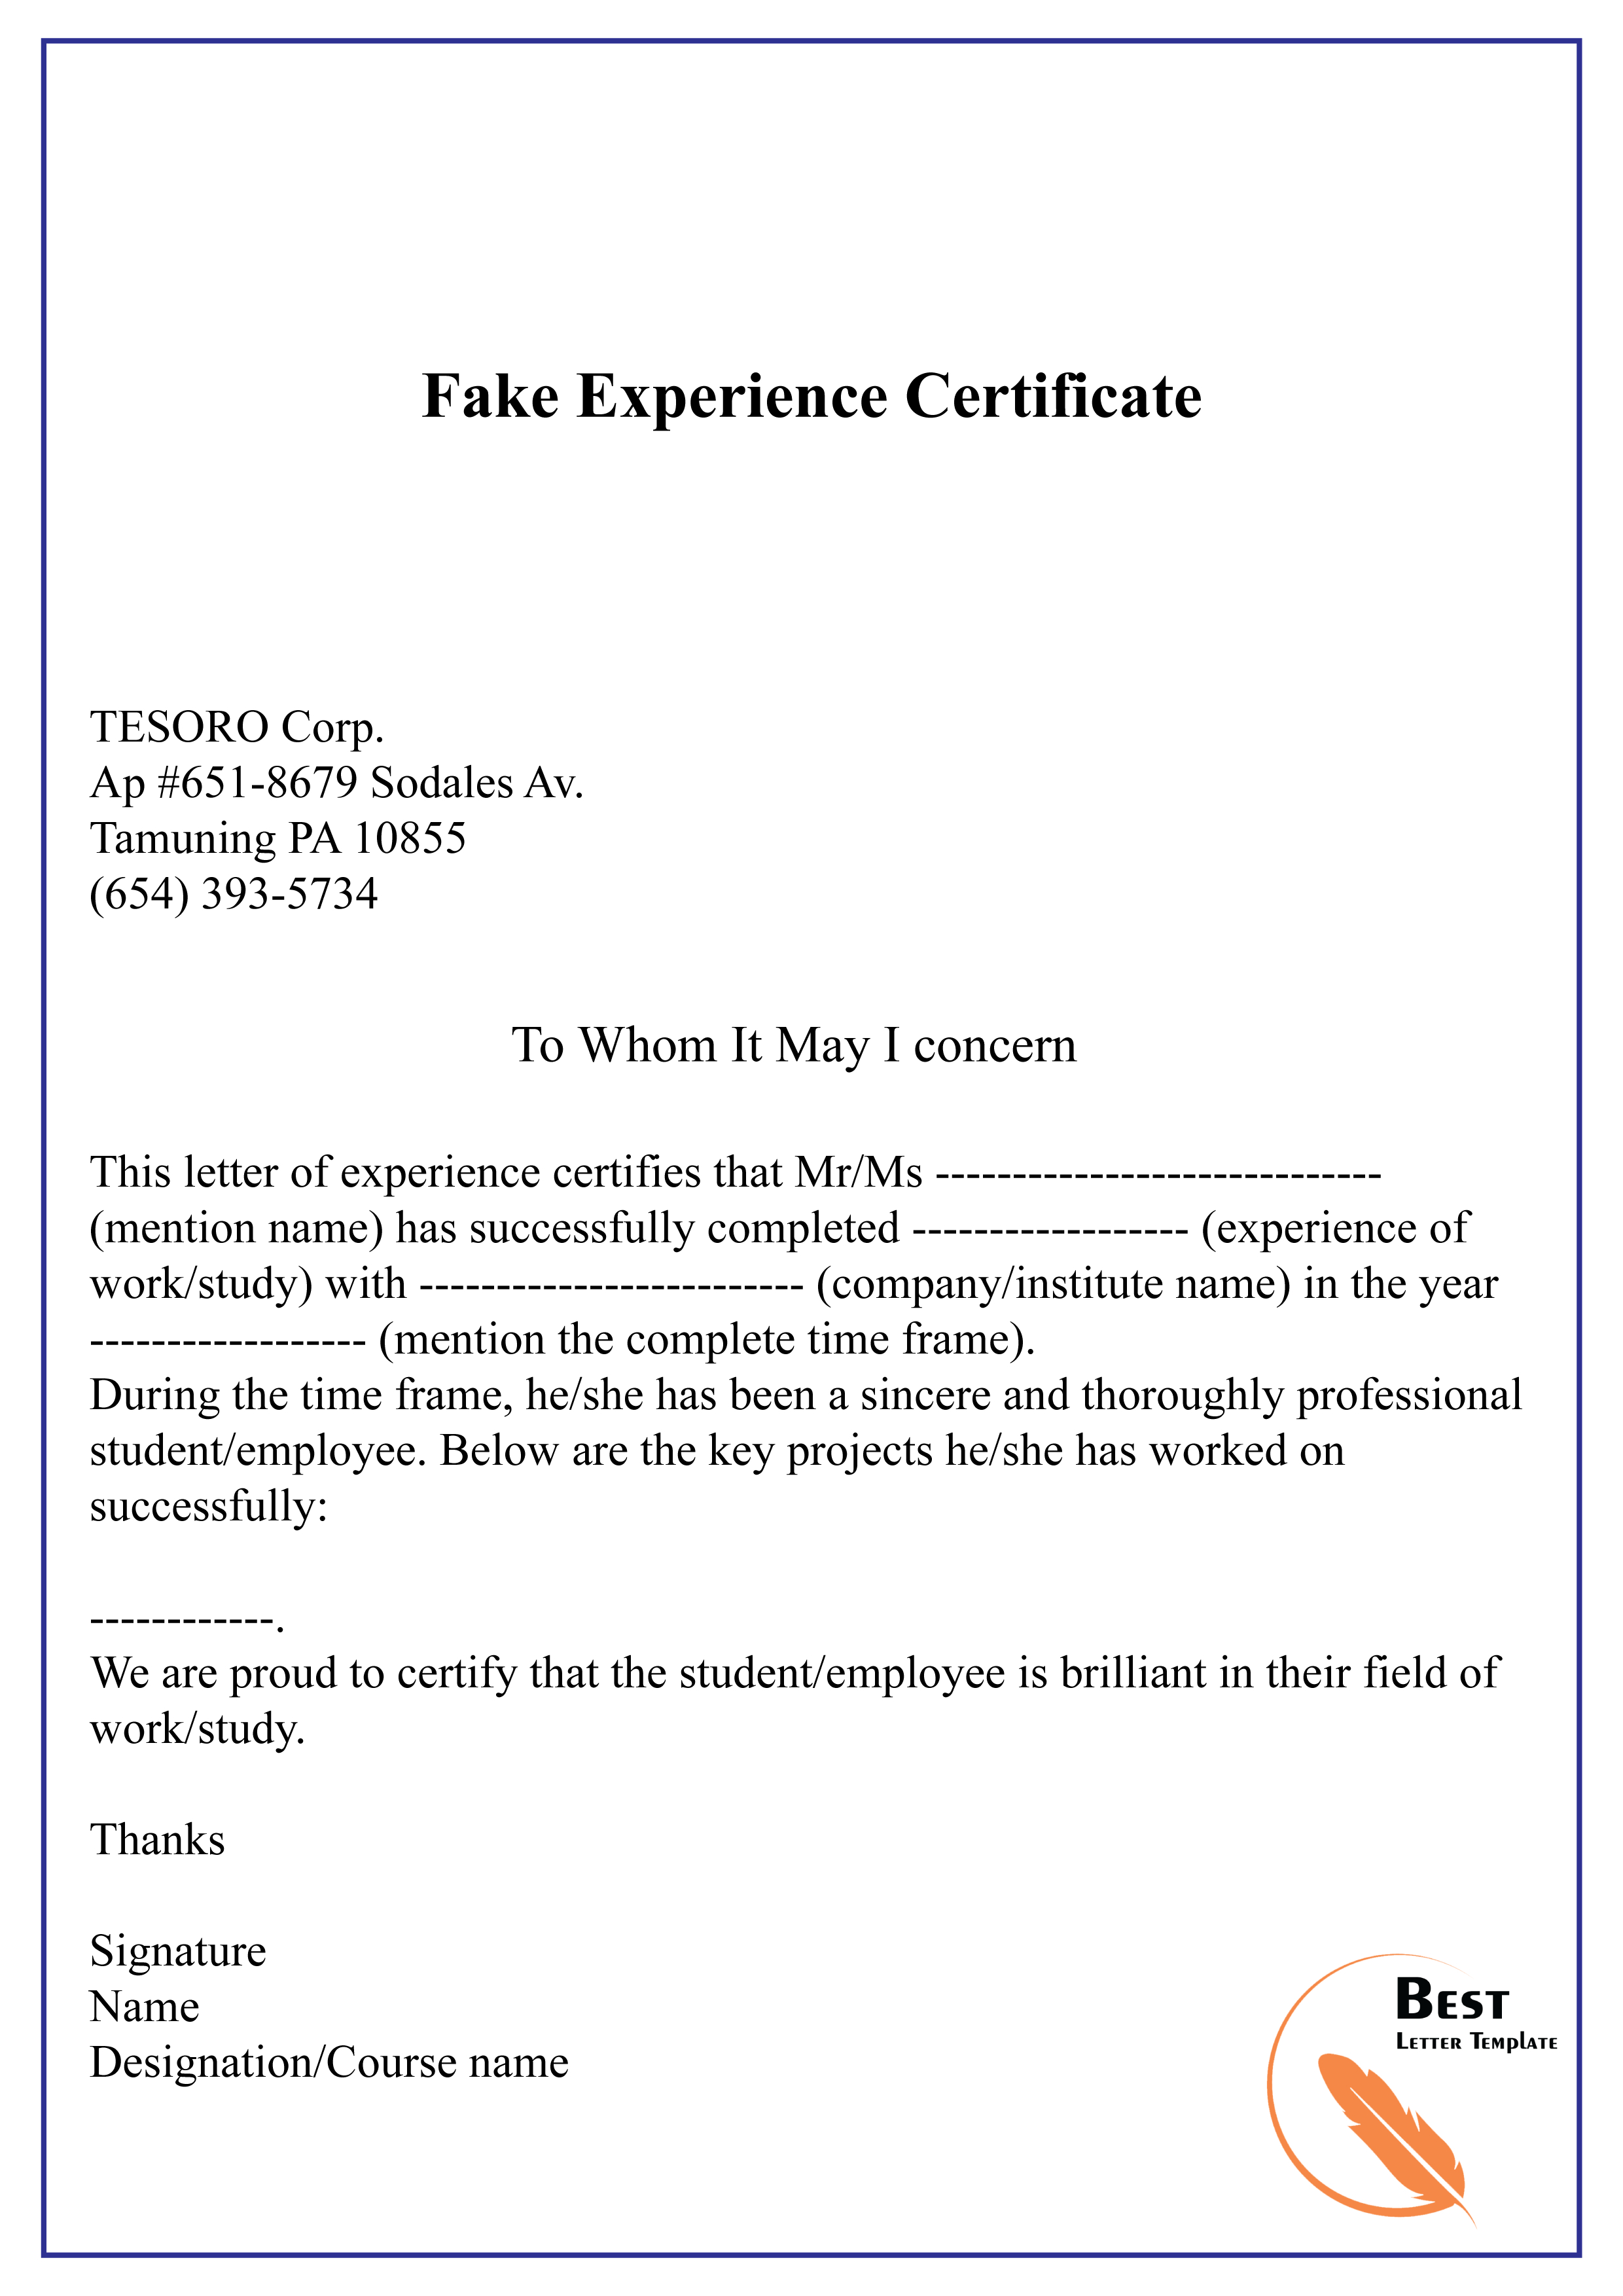 Fake Experience Certificate 01 | Best Letter Template Inside Template Of Experience Certificate